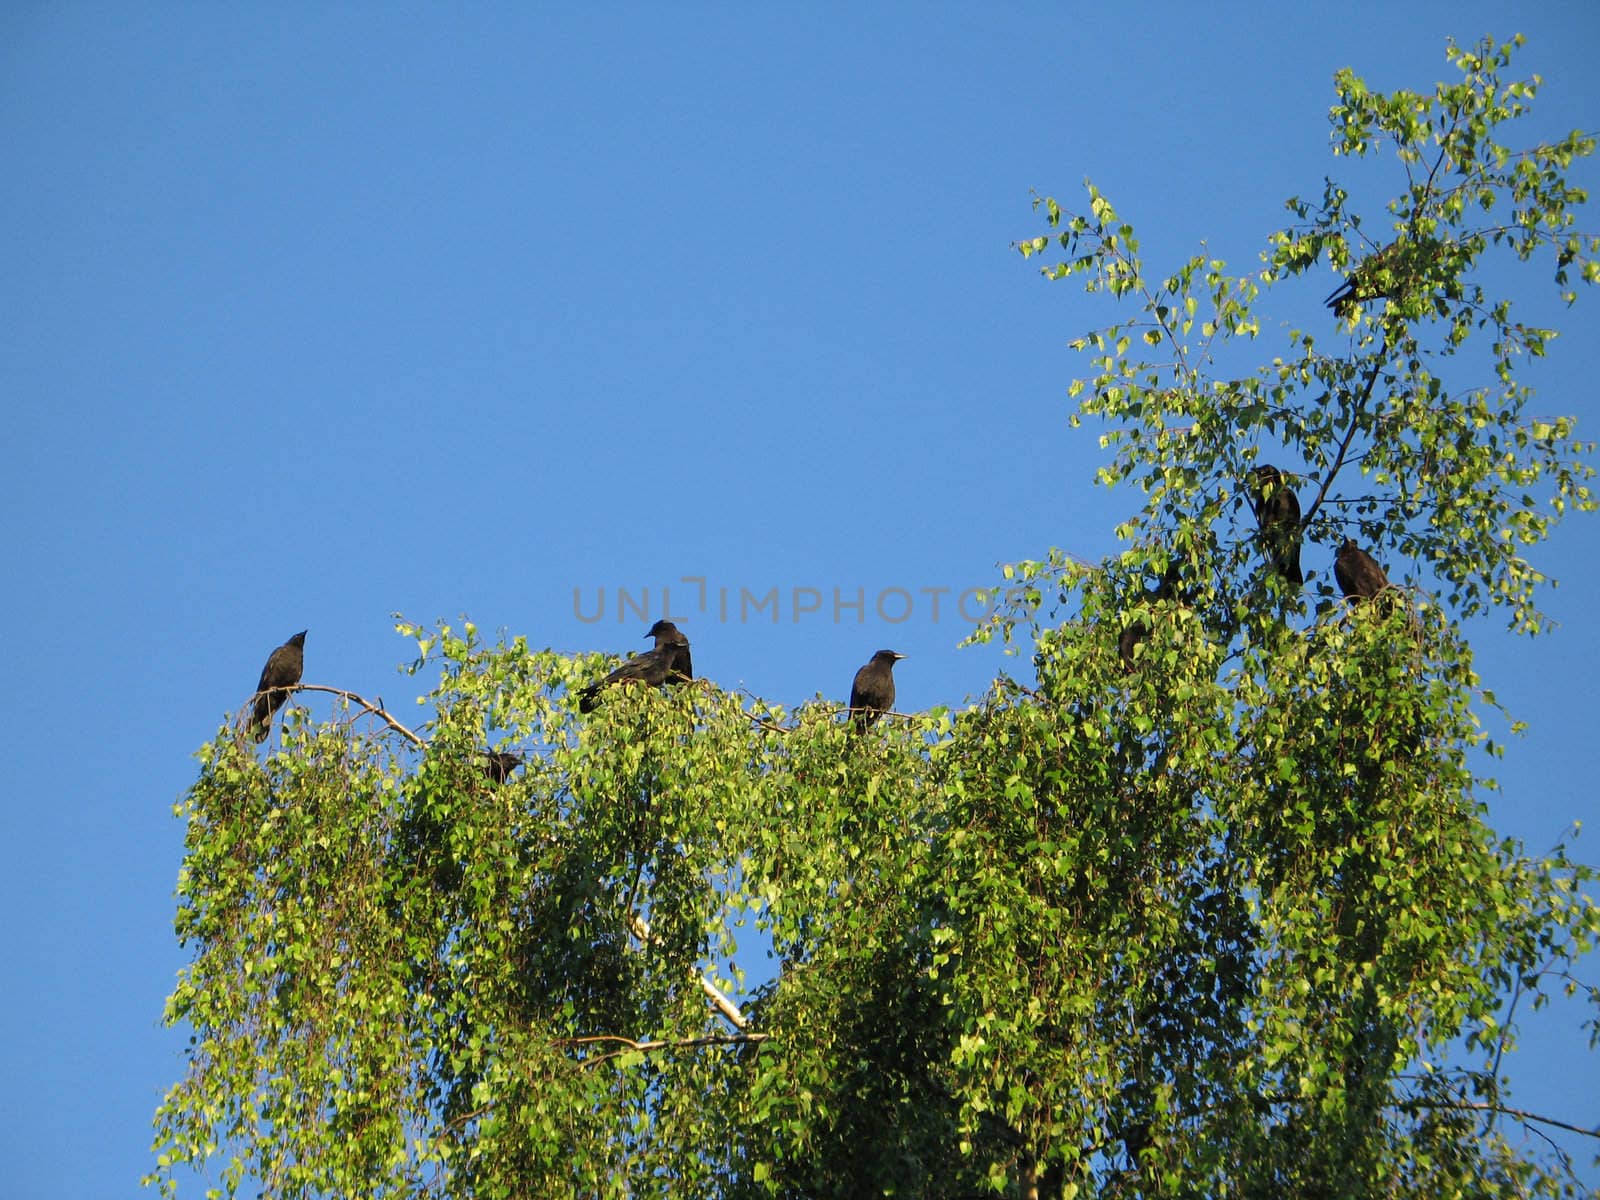 crow crowd on a tree by mmm